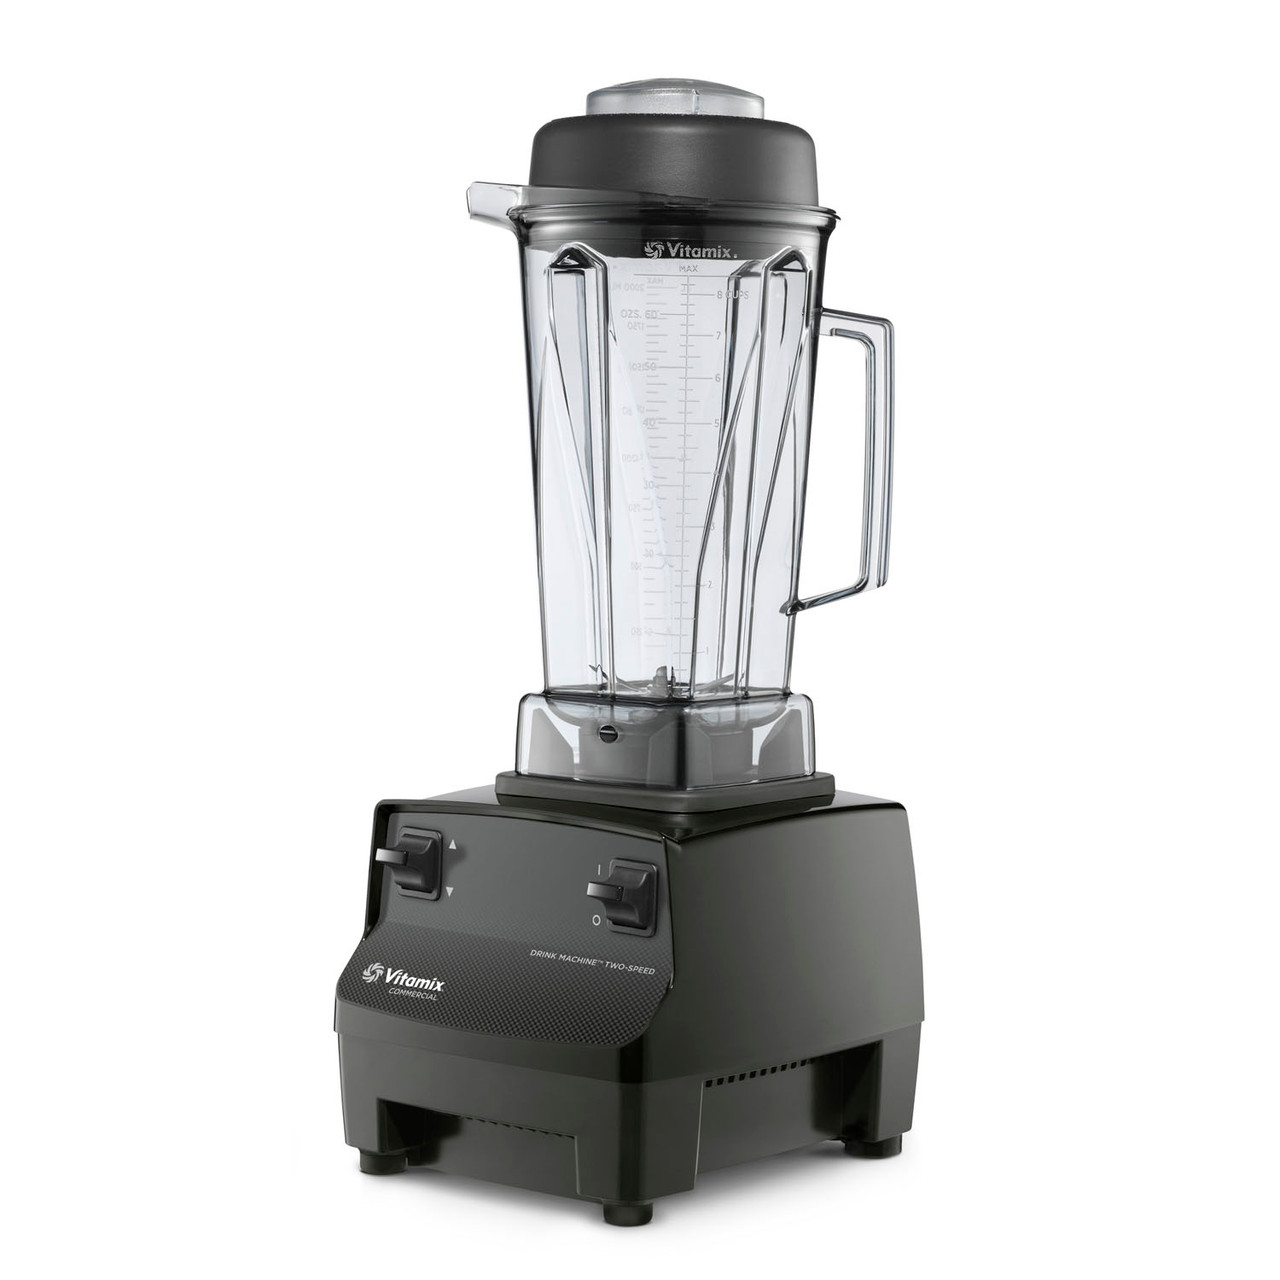 https://cdn11.bigcommerce.com/s-6mxrbbhtjl/images/stencil/1280x1280/products/3401/8916/vitamix-62828-64oz-two-speed-drink-machine-commercial-blender__66169.1597947291.jpg?c=1&imbypass=on